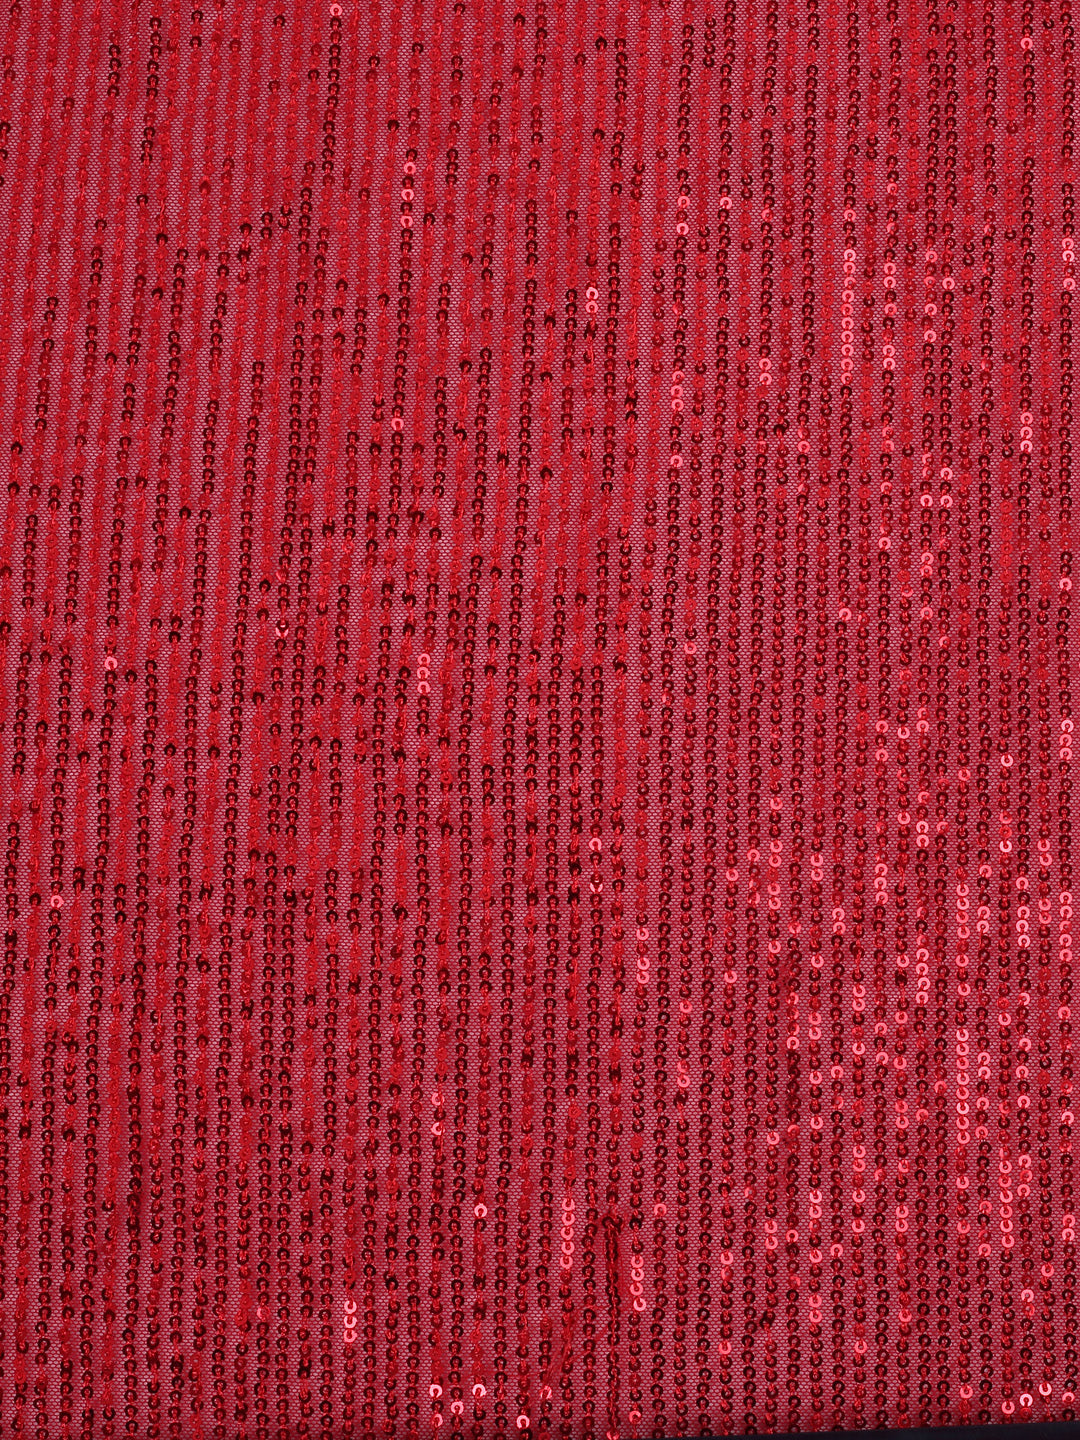 Red Stretchable Net Fabric With Sequin